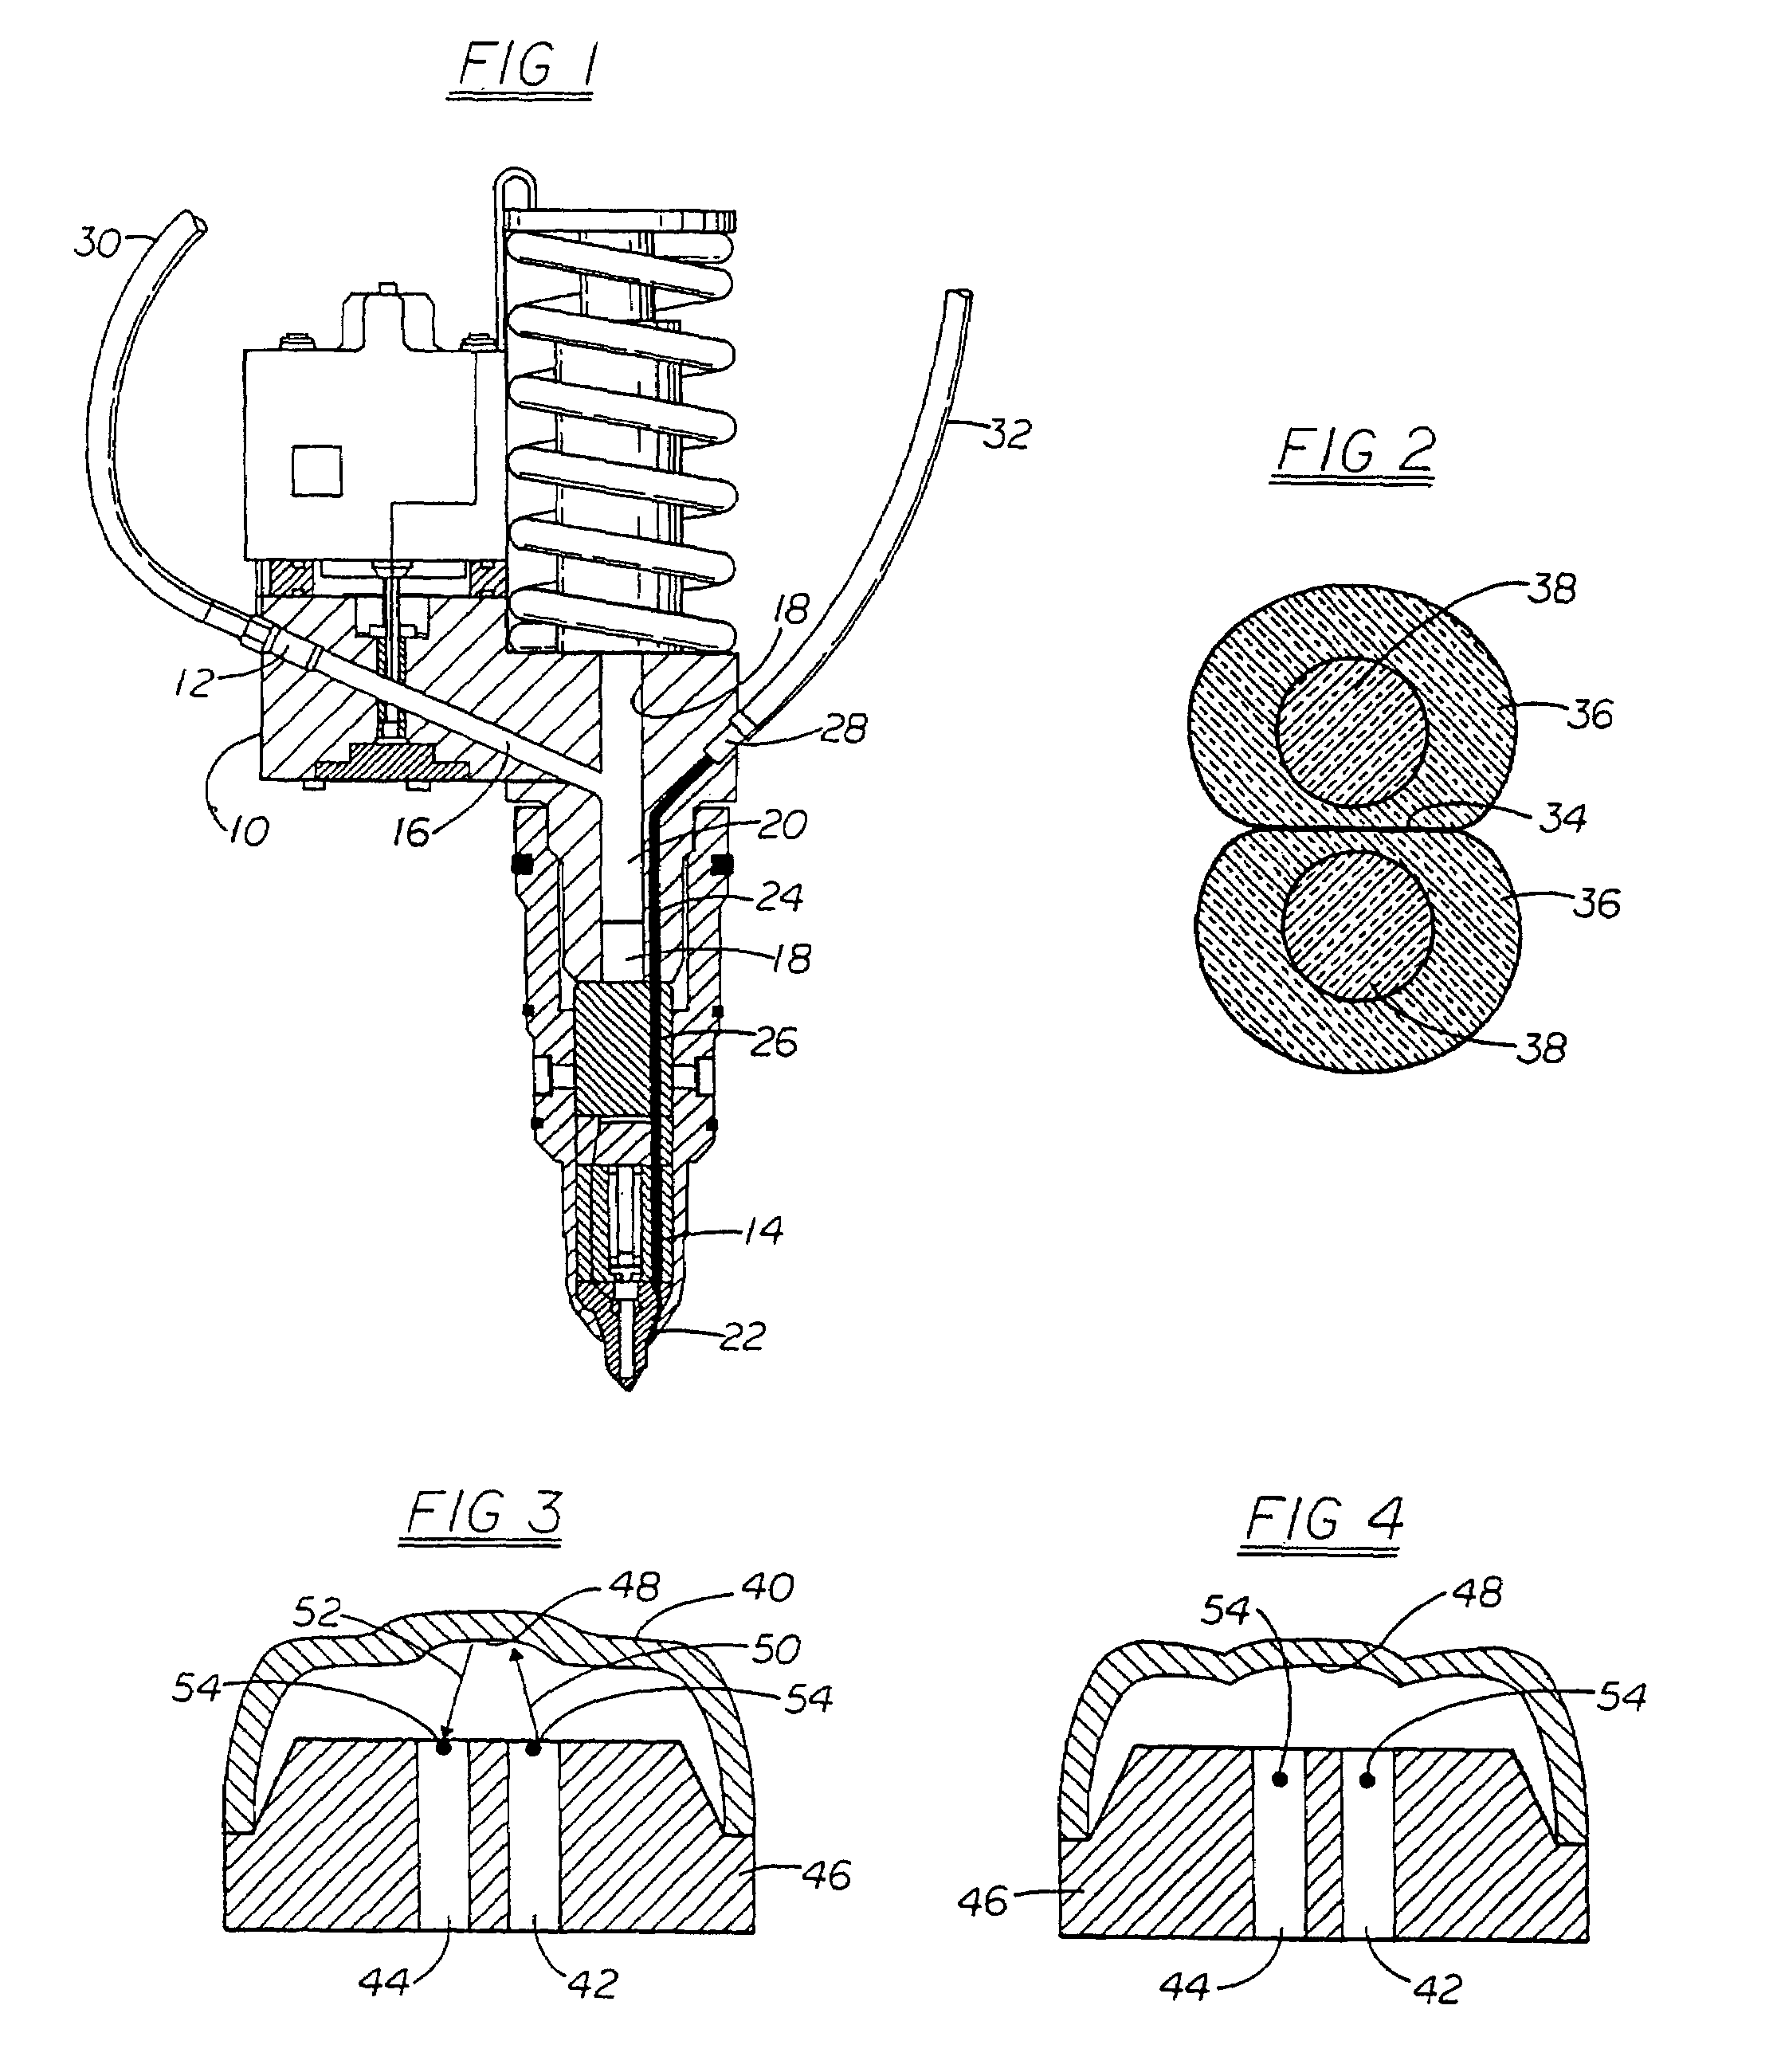 Fuel injectors with integral fiber optic pressure sensors and associated compensation and status monitoring devices